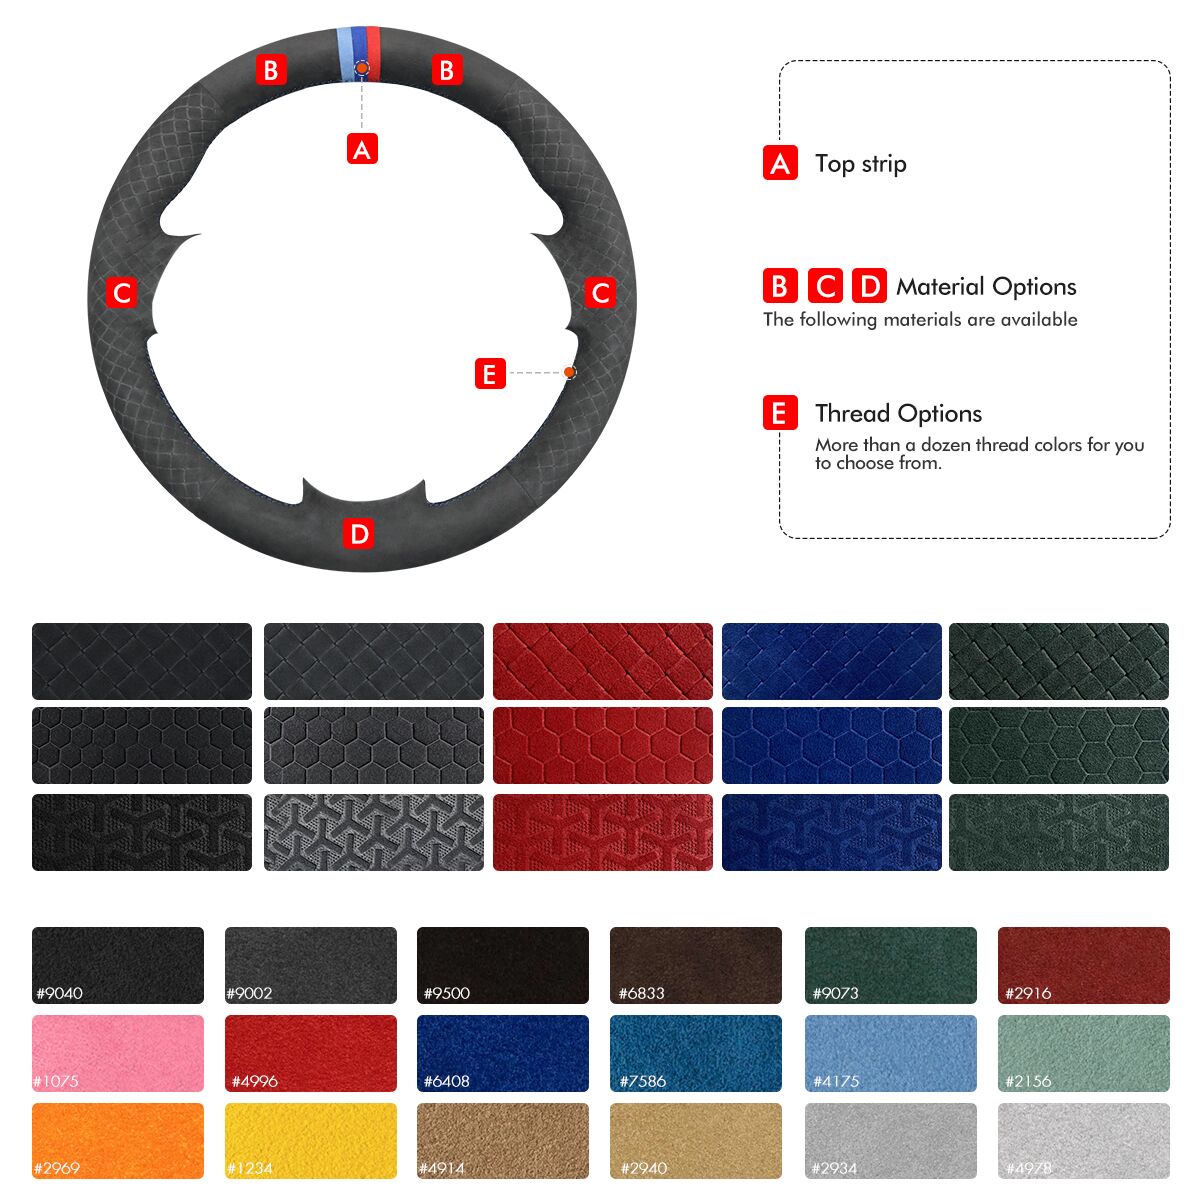 MEWANT Hand Stitch Car Steering Wheel Cover for Peugeot RCZ 2010-2015